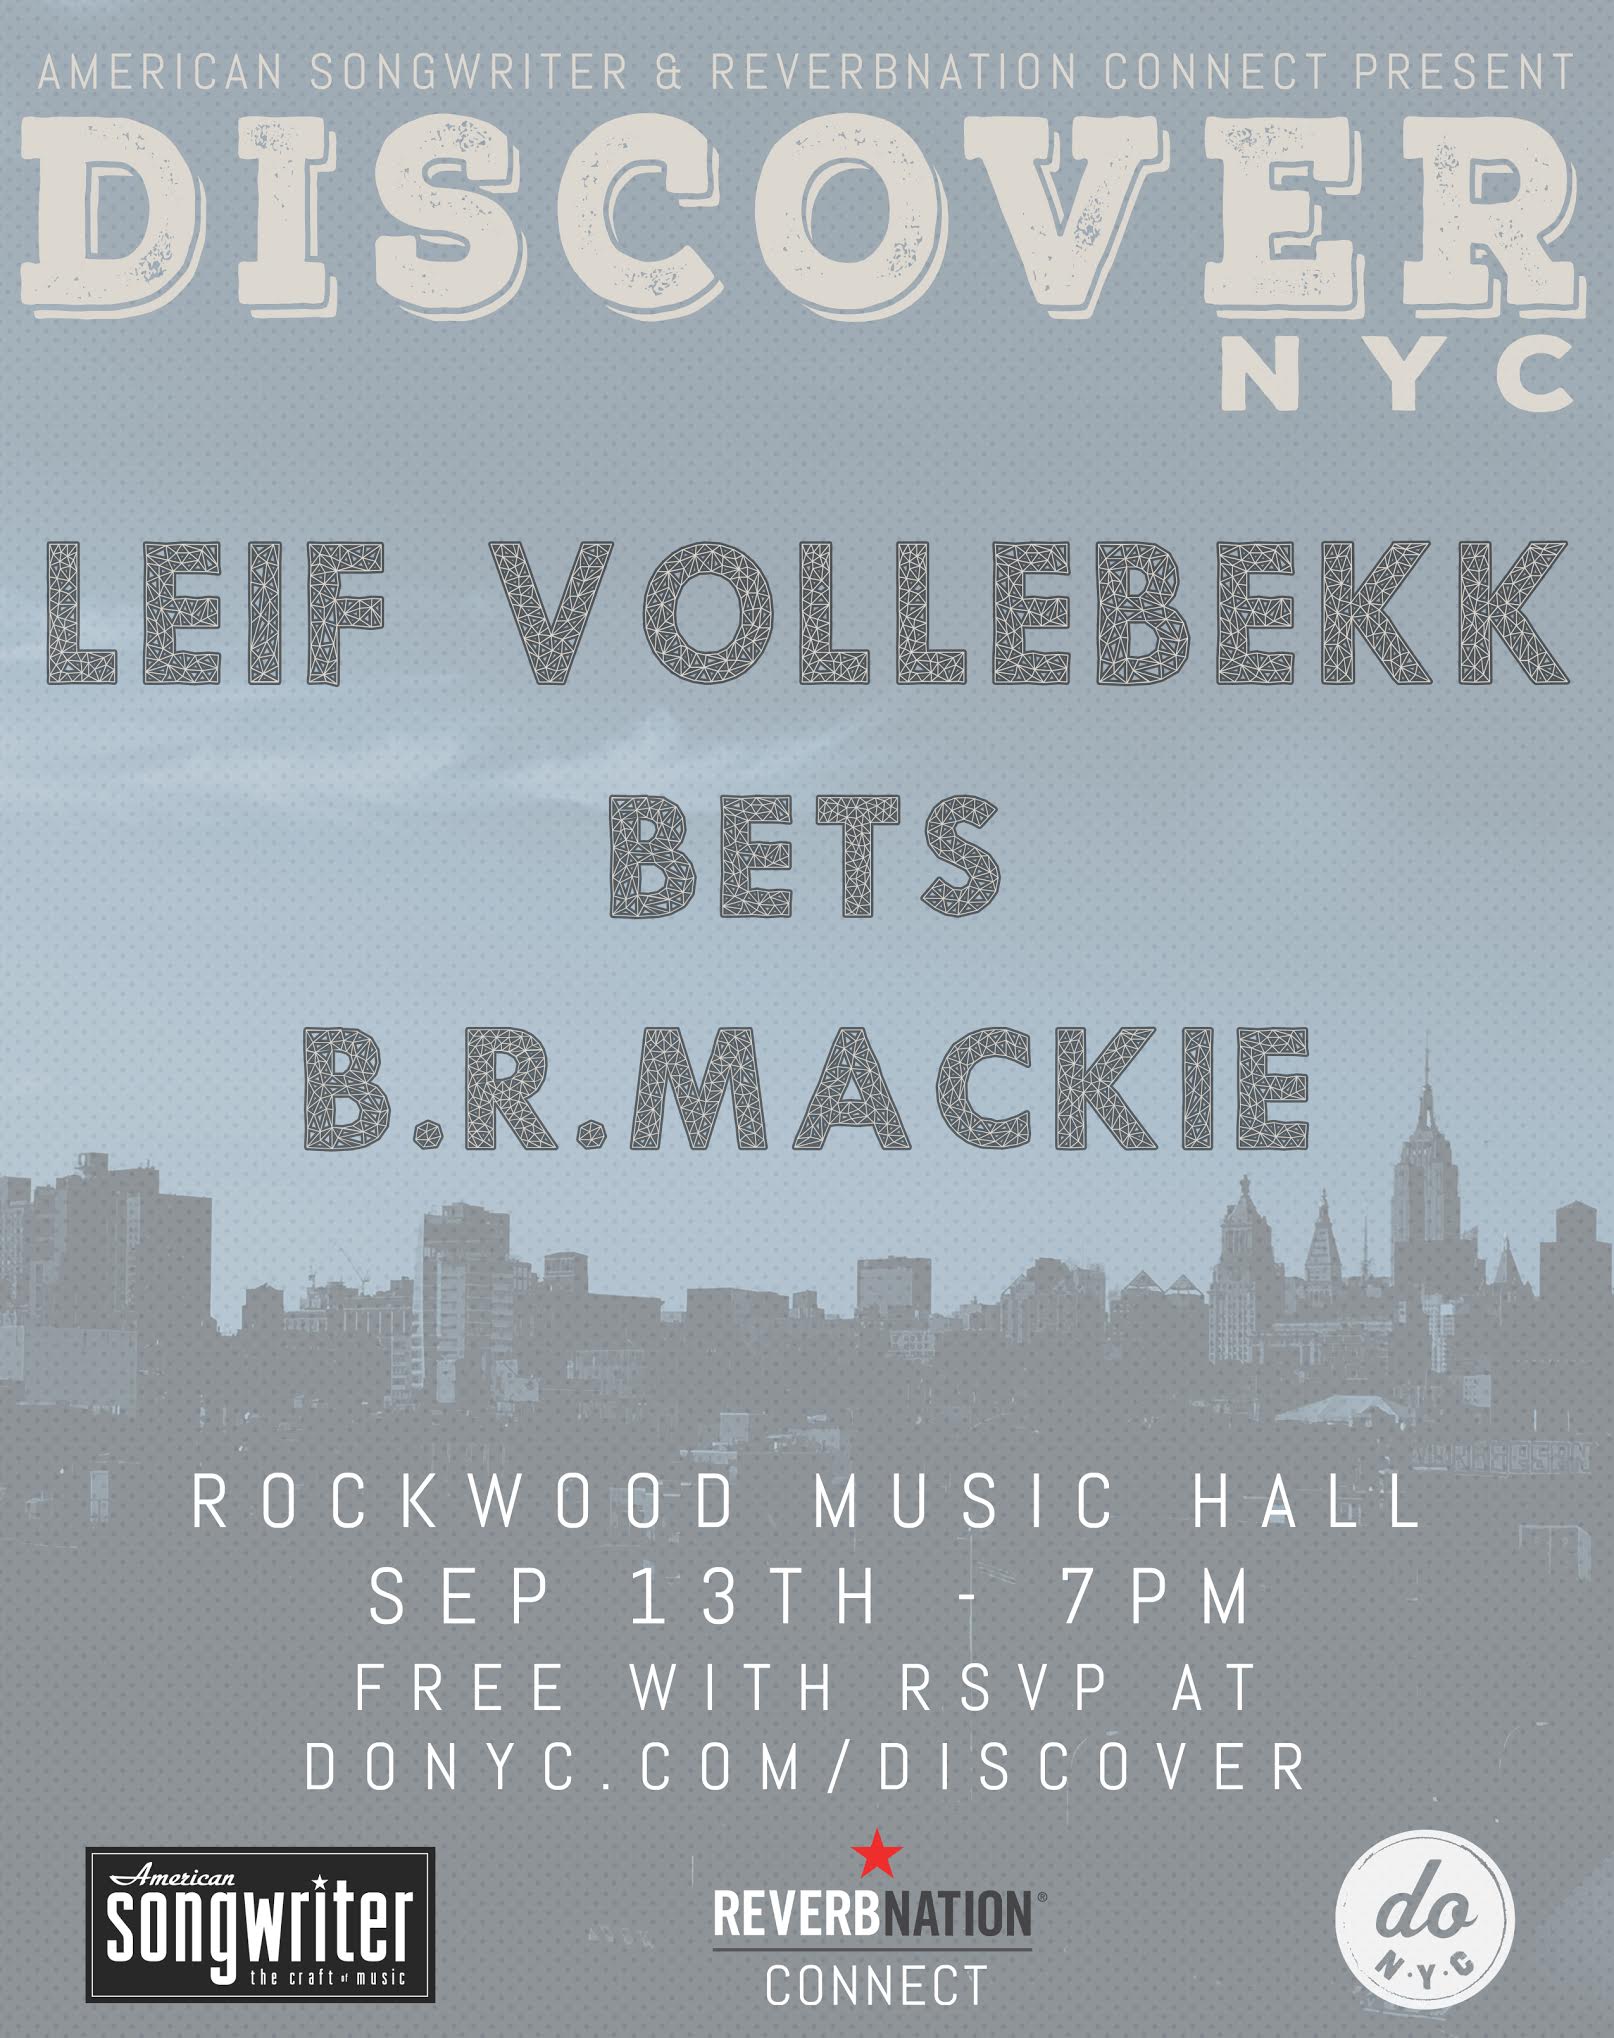 DISCOVER Series Returns To New York City September 13 With Leif Vollebekk, BETS and B.R. Mackie